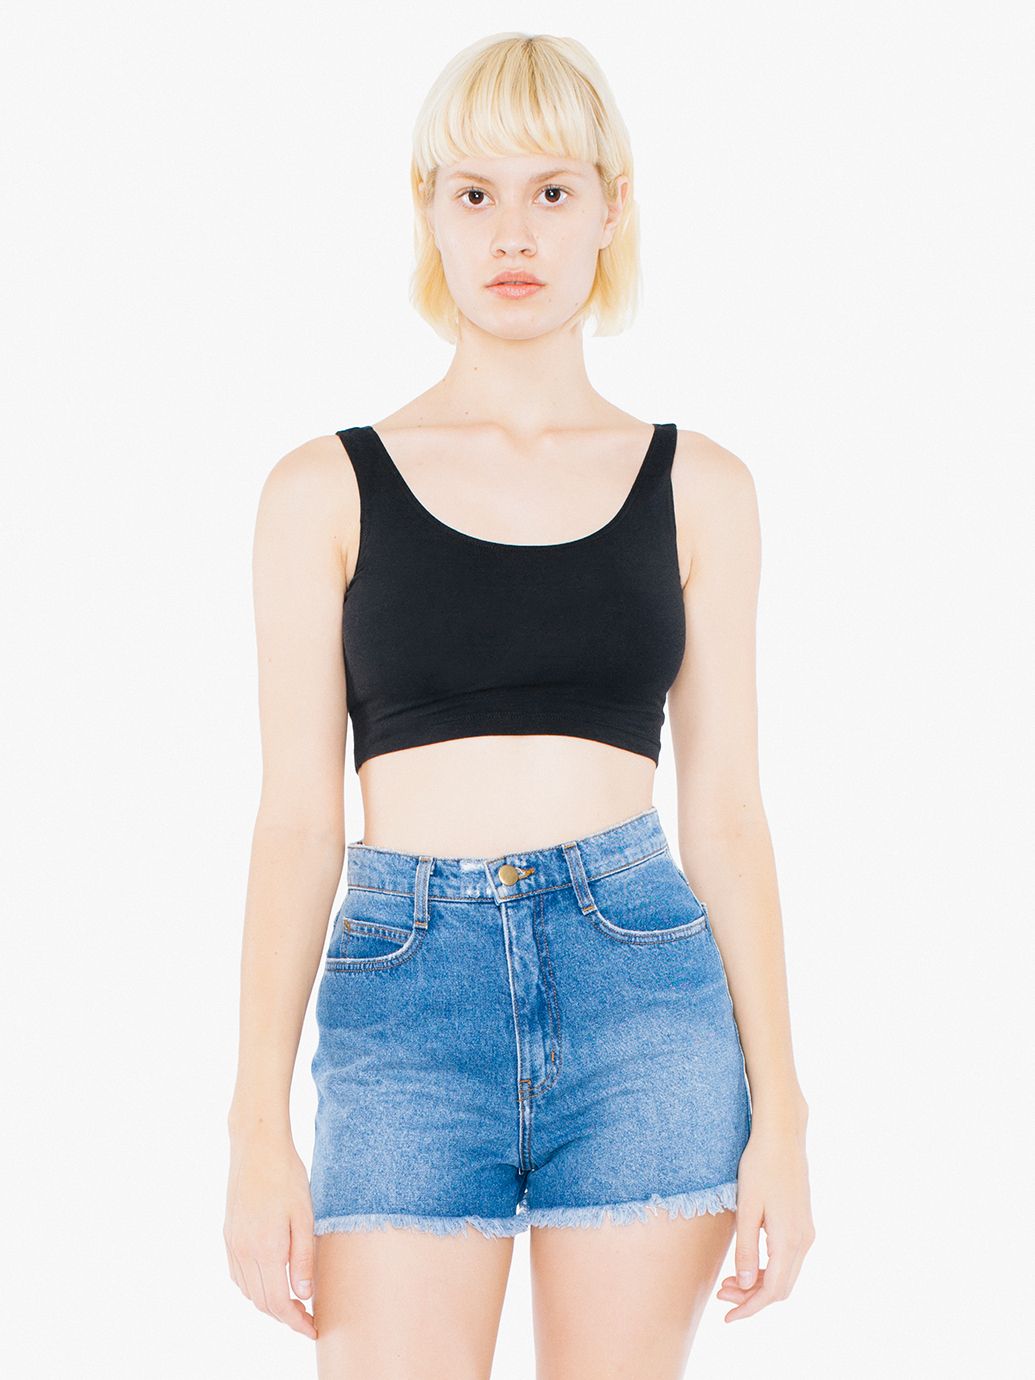 AMA Tanktop Crop Cot/Spandex For Her